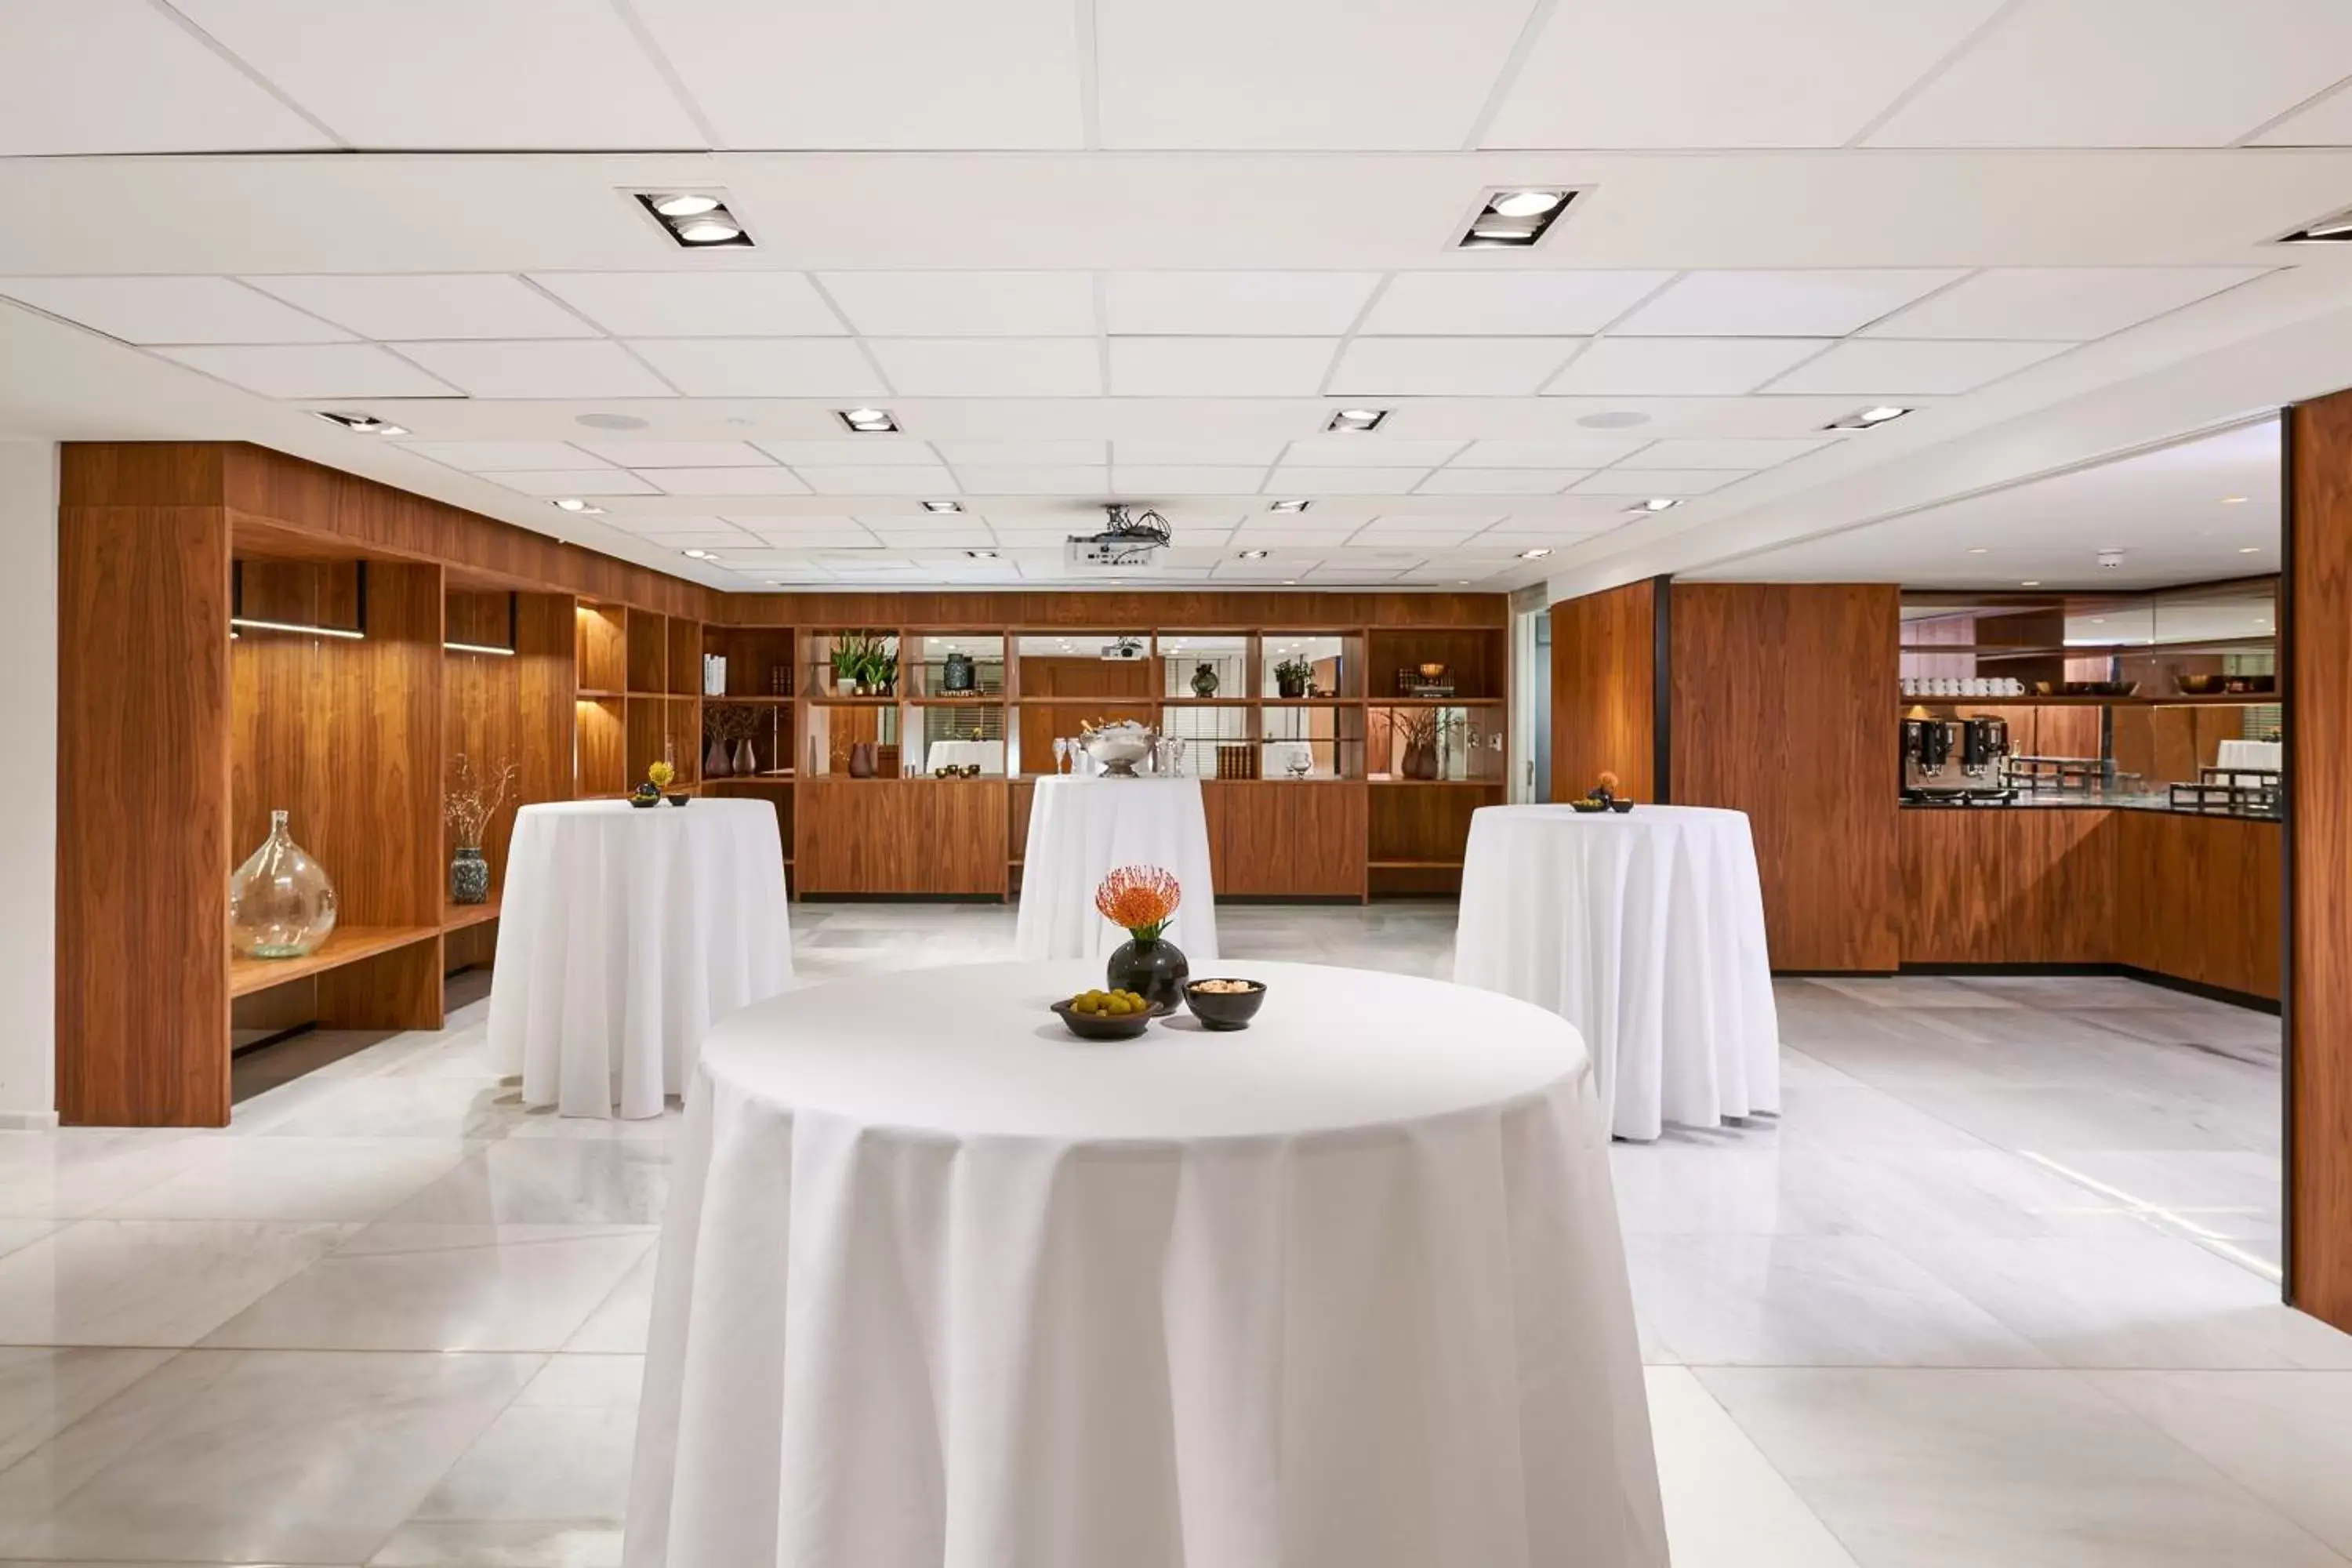 Meeting/conference room, Banquet Facilities in Melia White House Hotel